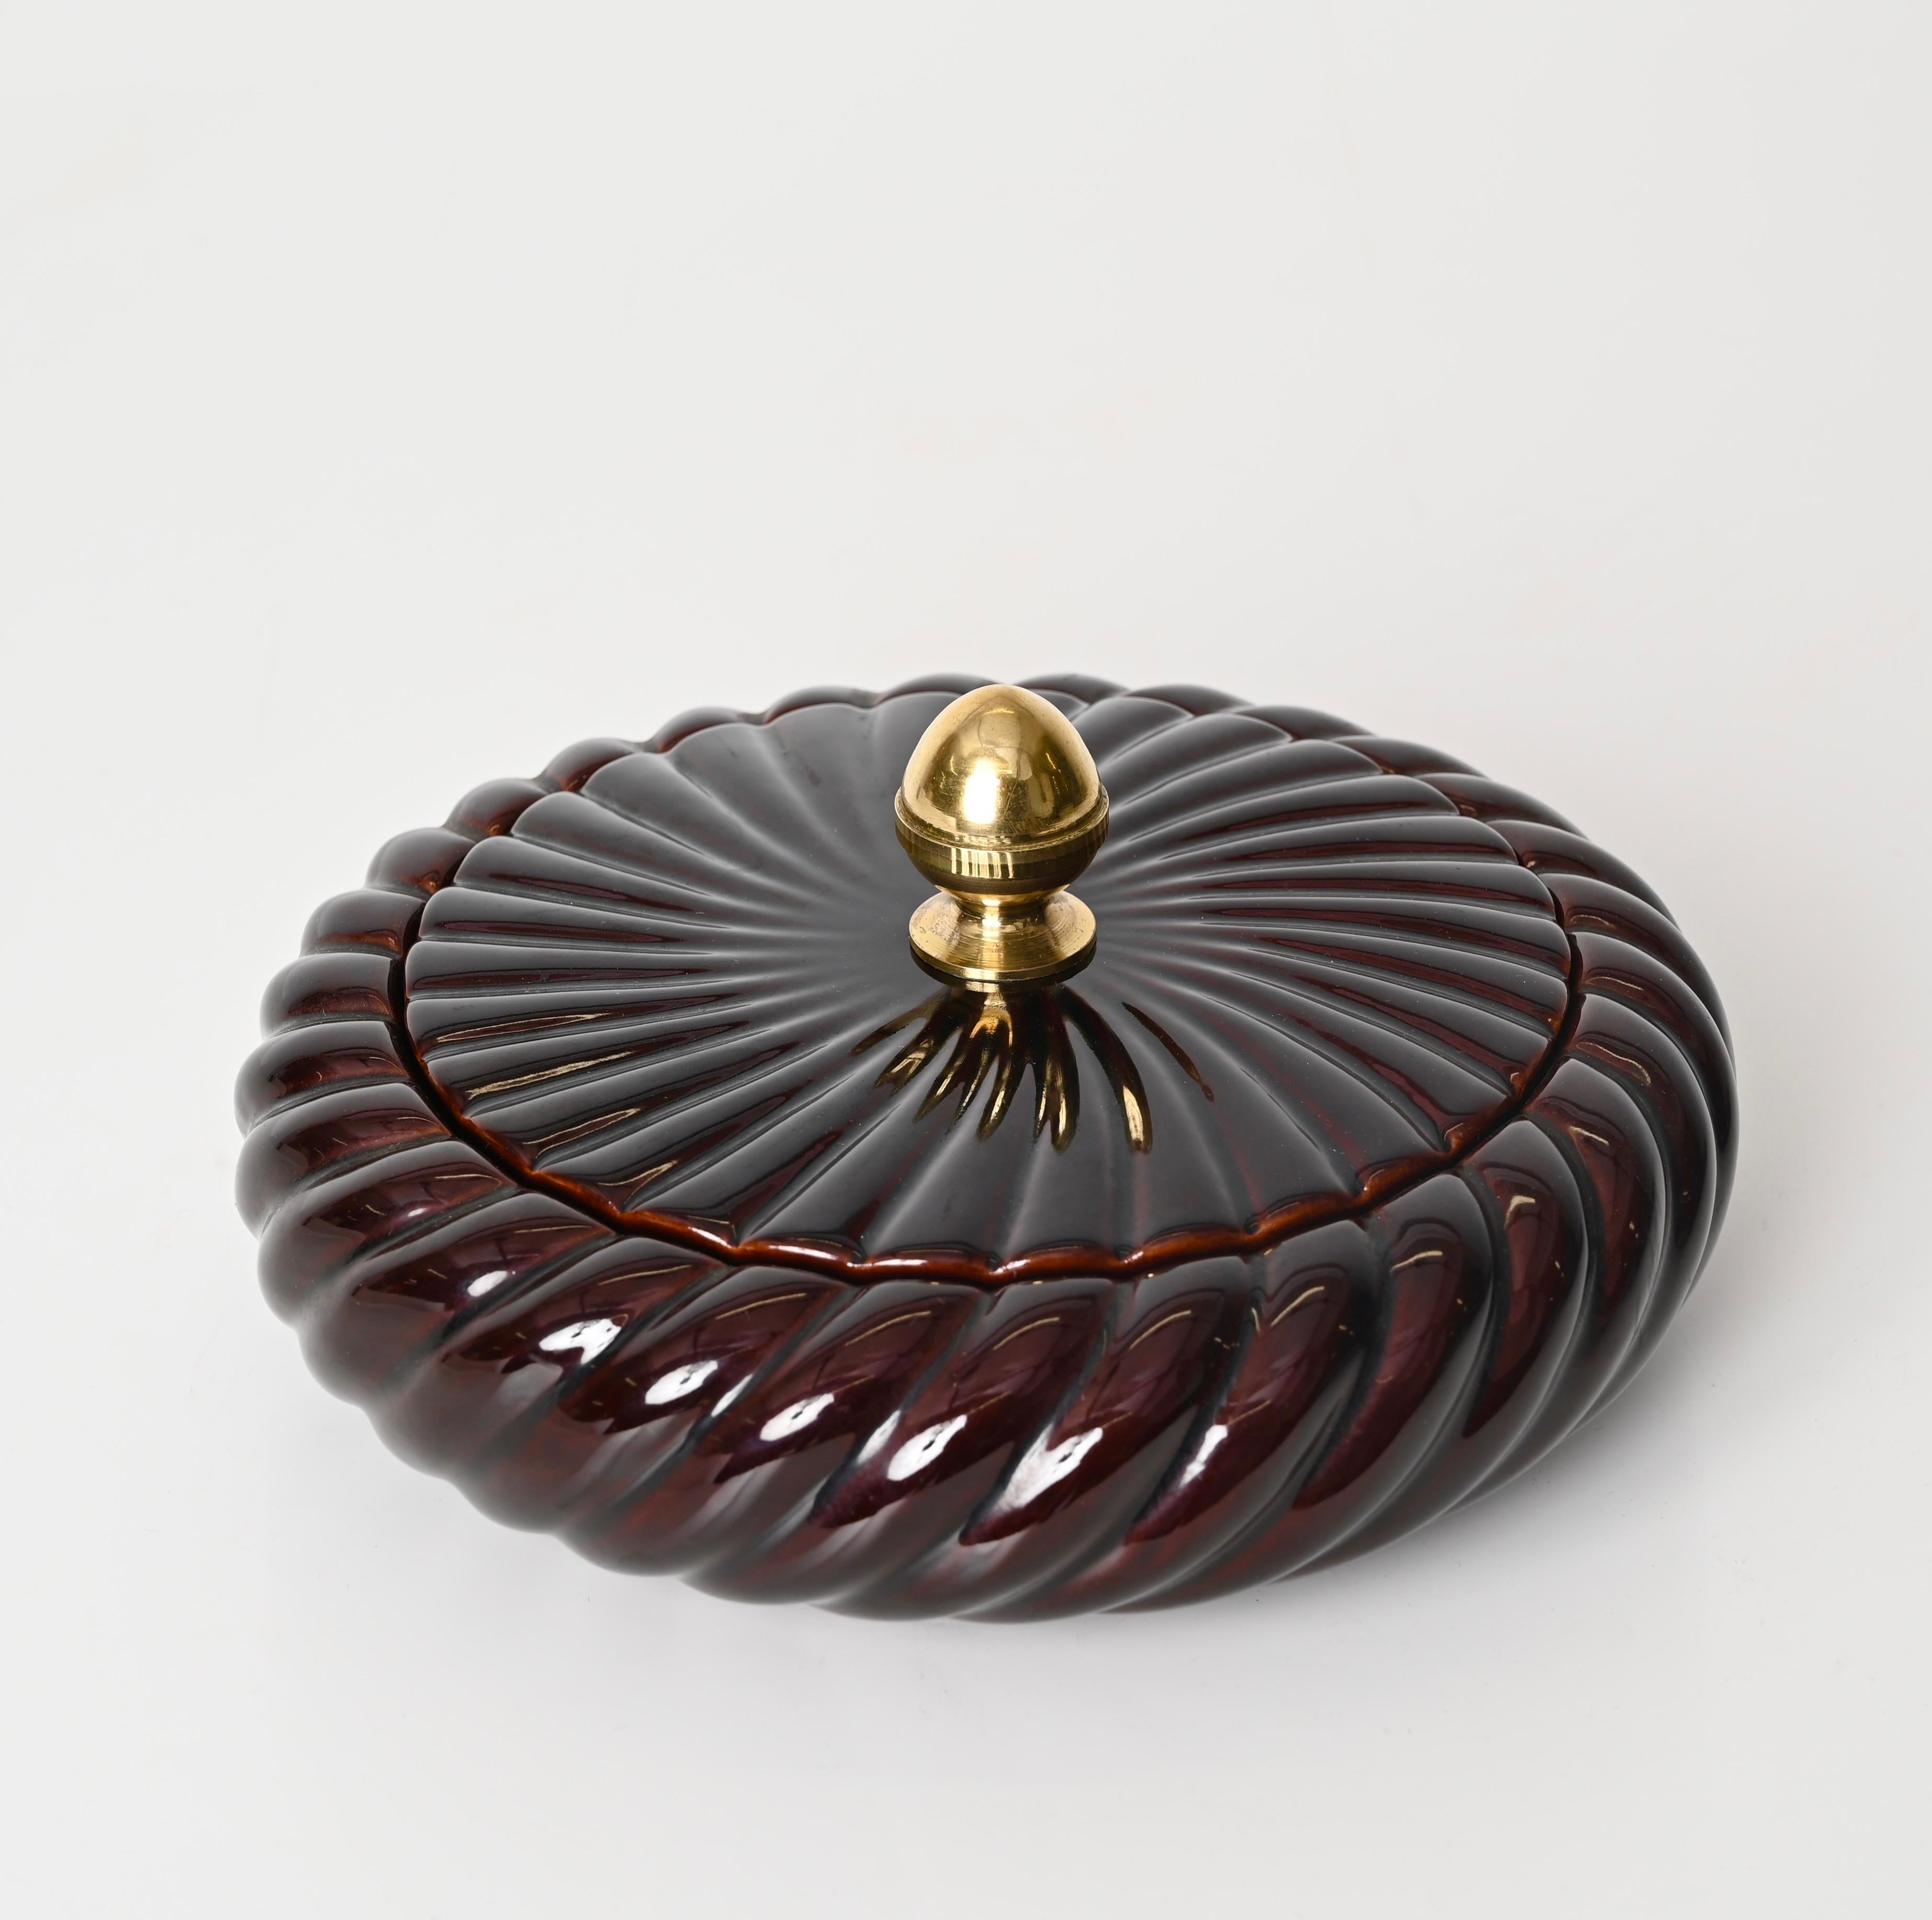 Tommaso Barbi Brown Ceramic and Brass Decorative Box or Centerpiece, Italy 1970s For Sale 9